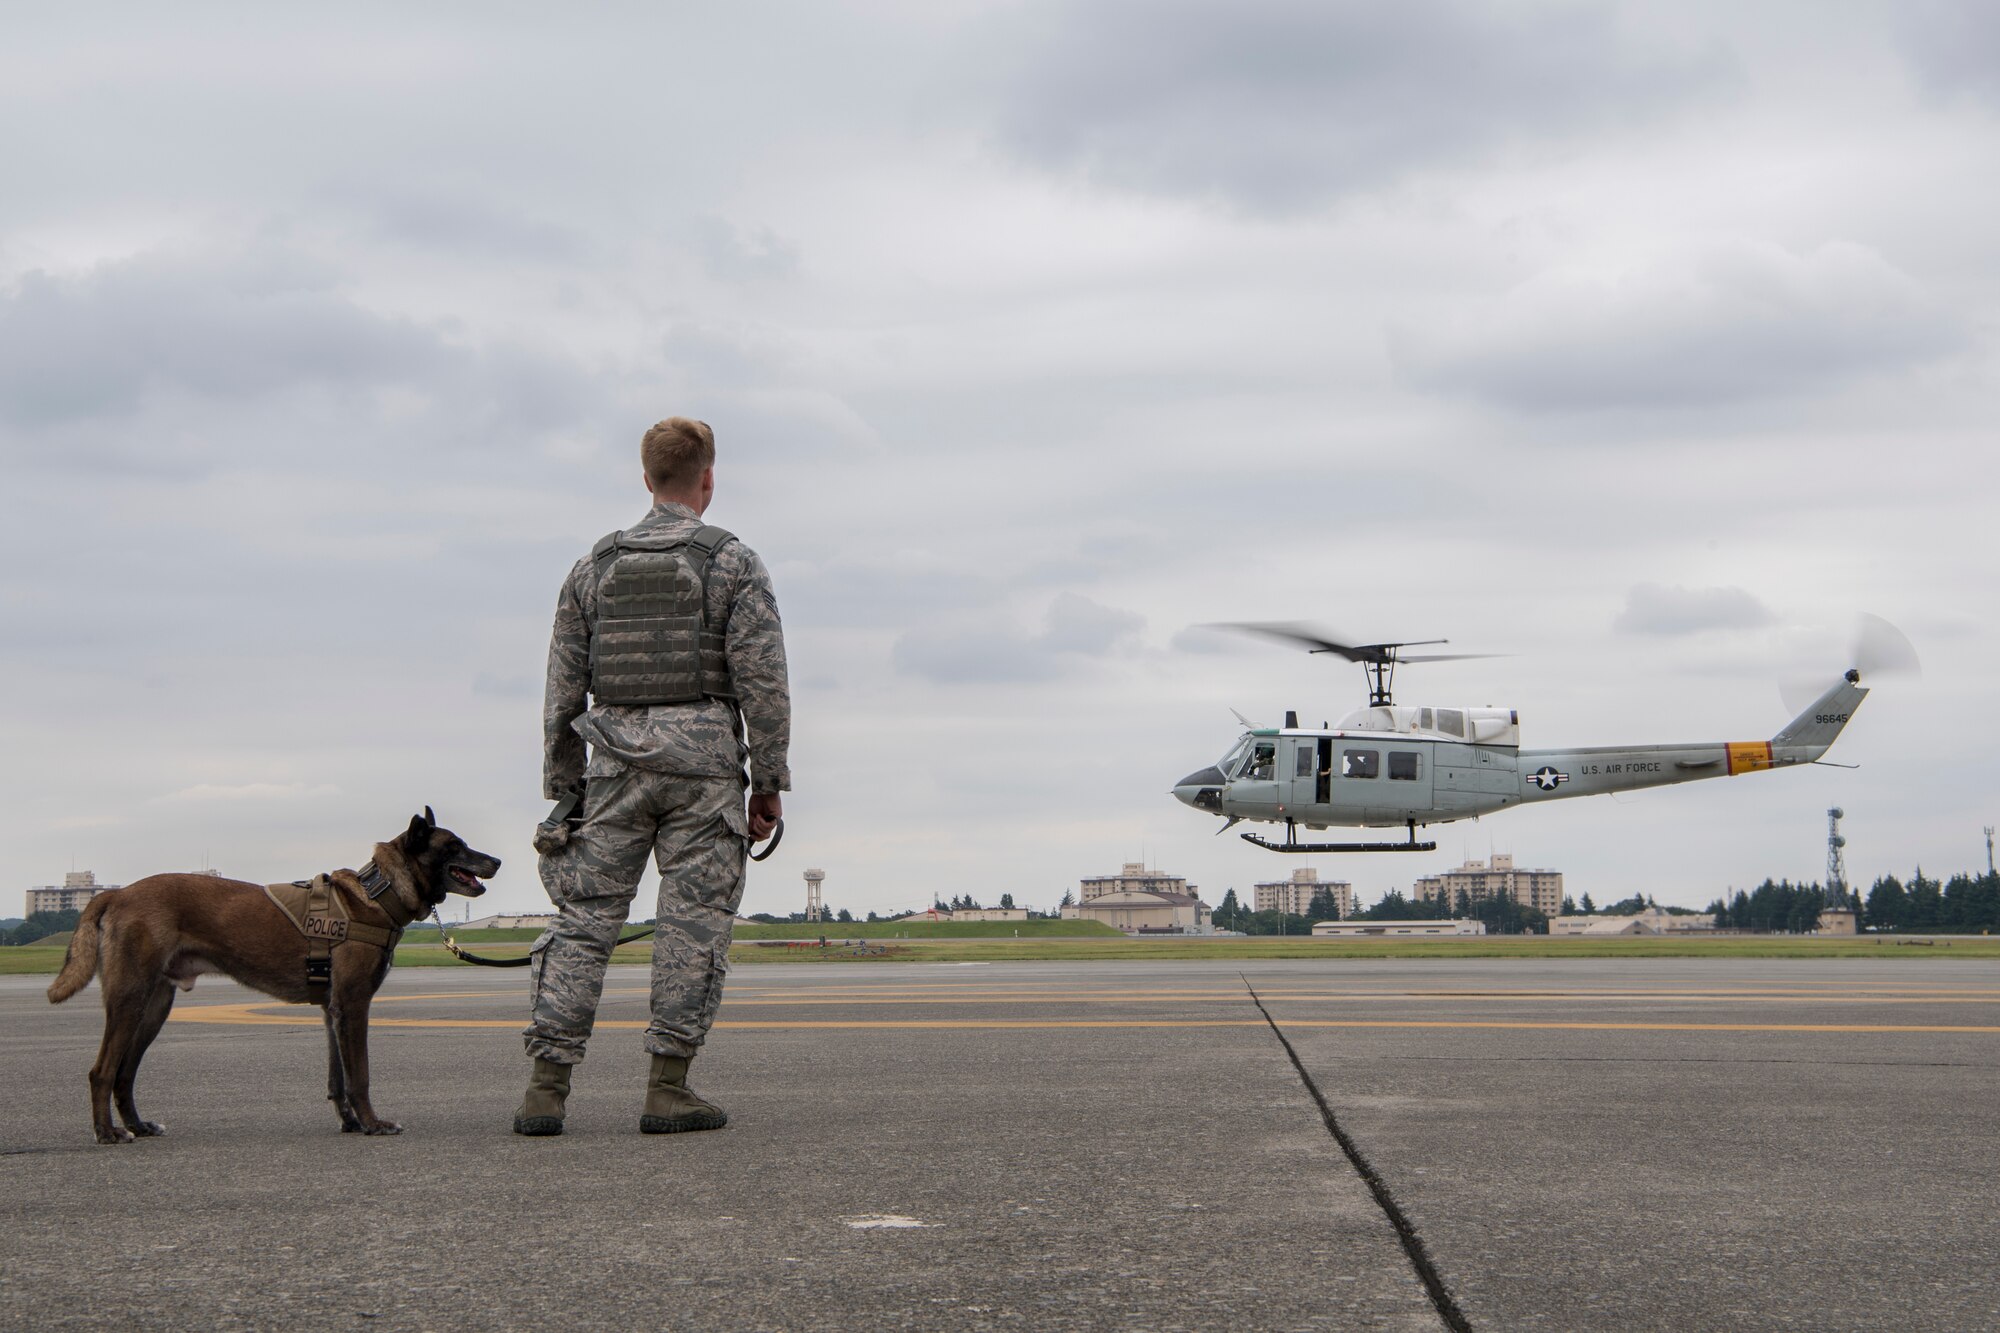 Staff Sgt. Cody Nickell, 374th Security Forces Squadron military working dog handler, watches with Topa, 374 SFS MWD, as a UH-1N helicopter takes off during a 459th Airlift Squadron MWD familiarization flight July 26, 2018, at Yokota Air Base, Japan.